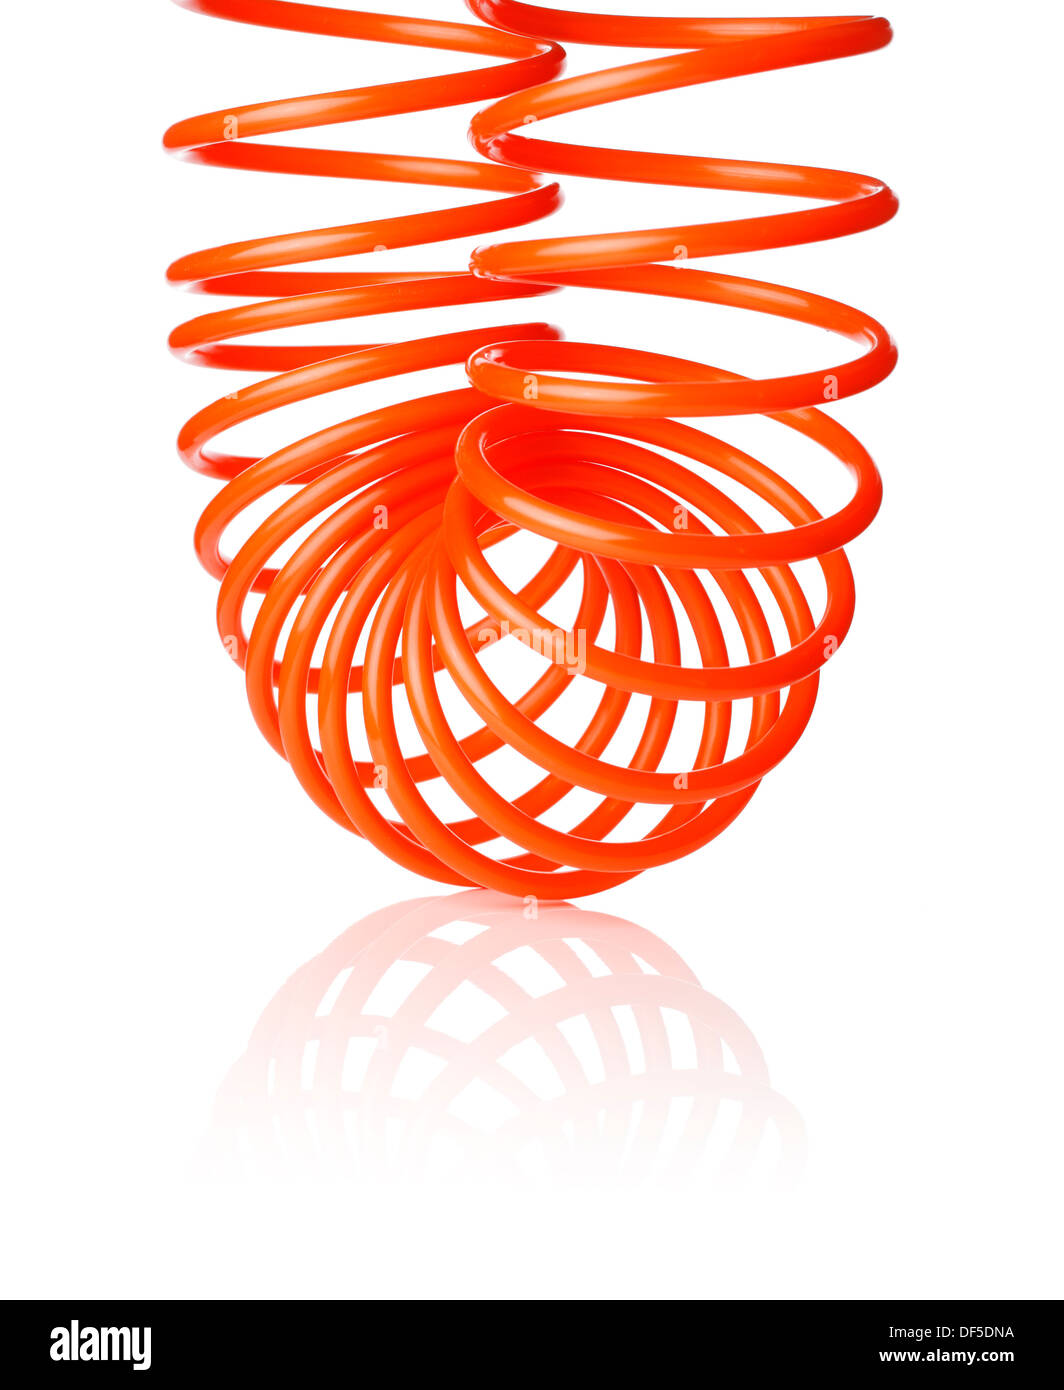 Orange red thin spiral air hose used for pneumatic tools, isolated on white with natural shadow. Stock Photo